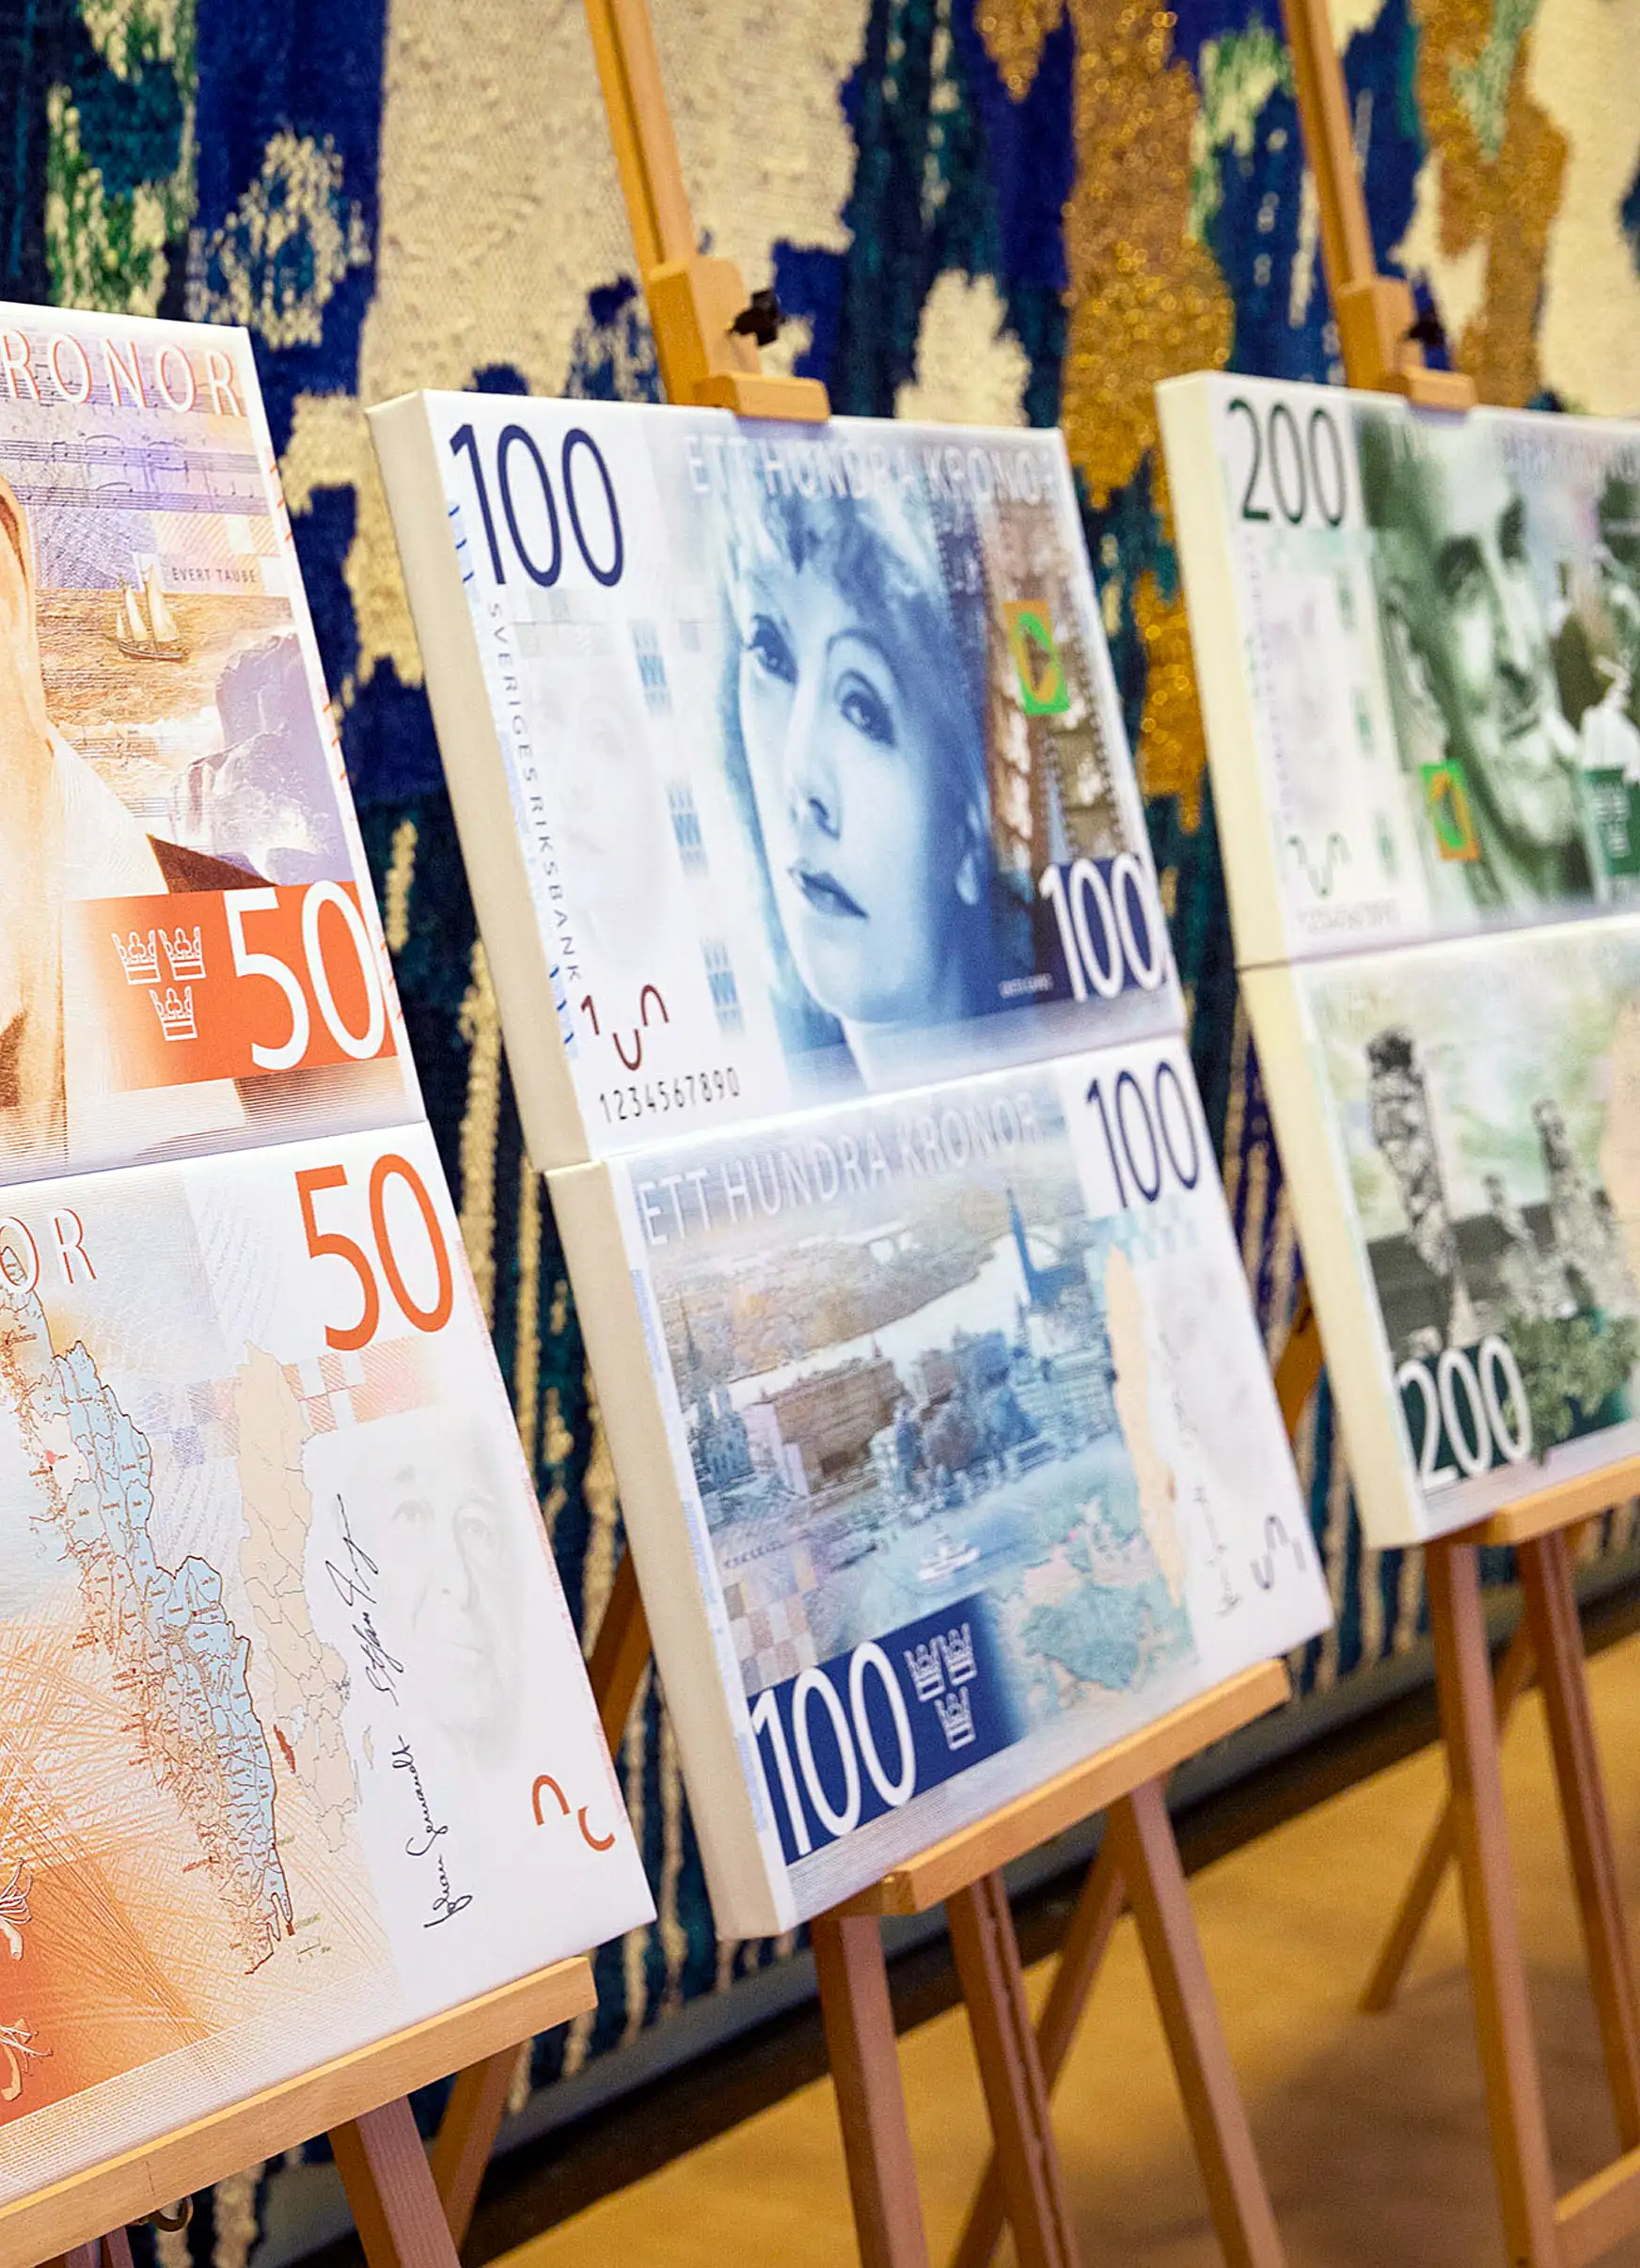 Artwork showing the designs of new folding Swedish krona, or kronor, currency notes due to be issued in 2014 stands on display at the Riksbank in Stockholm, Sweden, on Tuesday, Jan. 22, 2013.